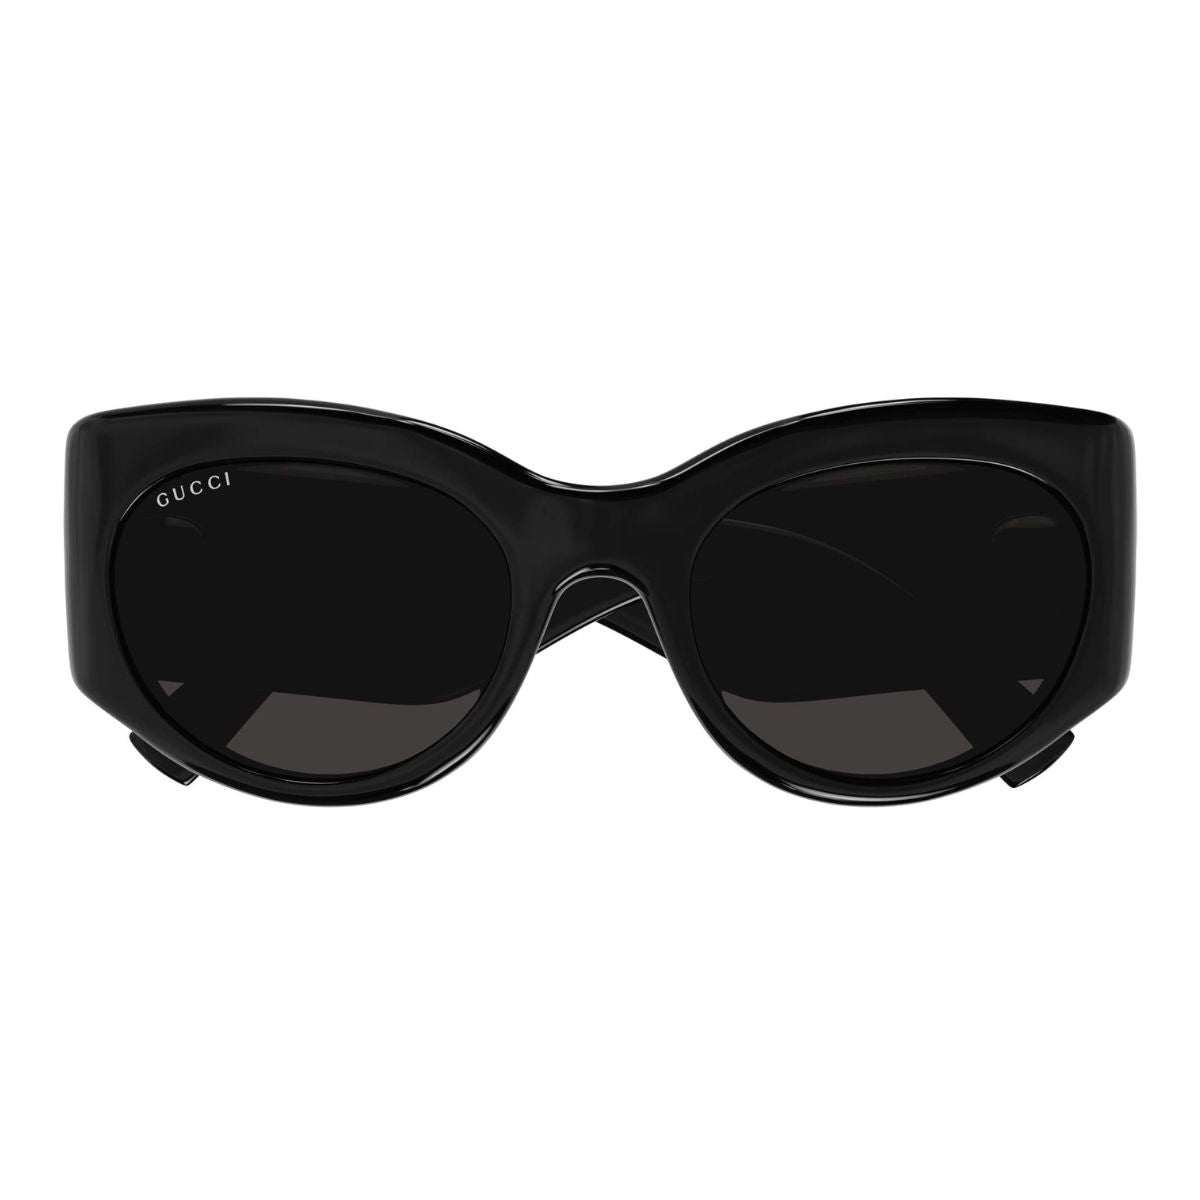 "Latest Black Color UV Protection Sunglass For Womens"